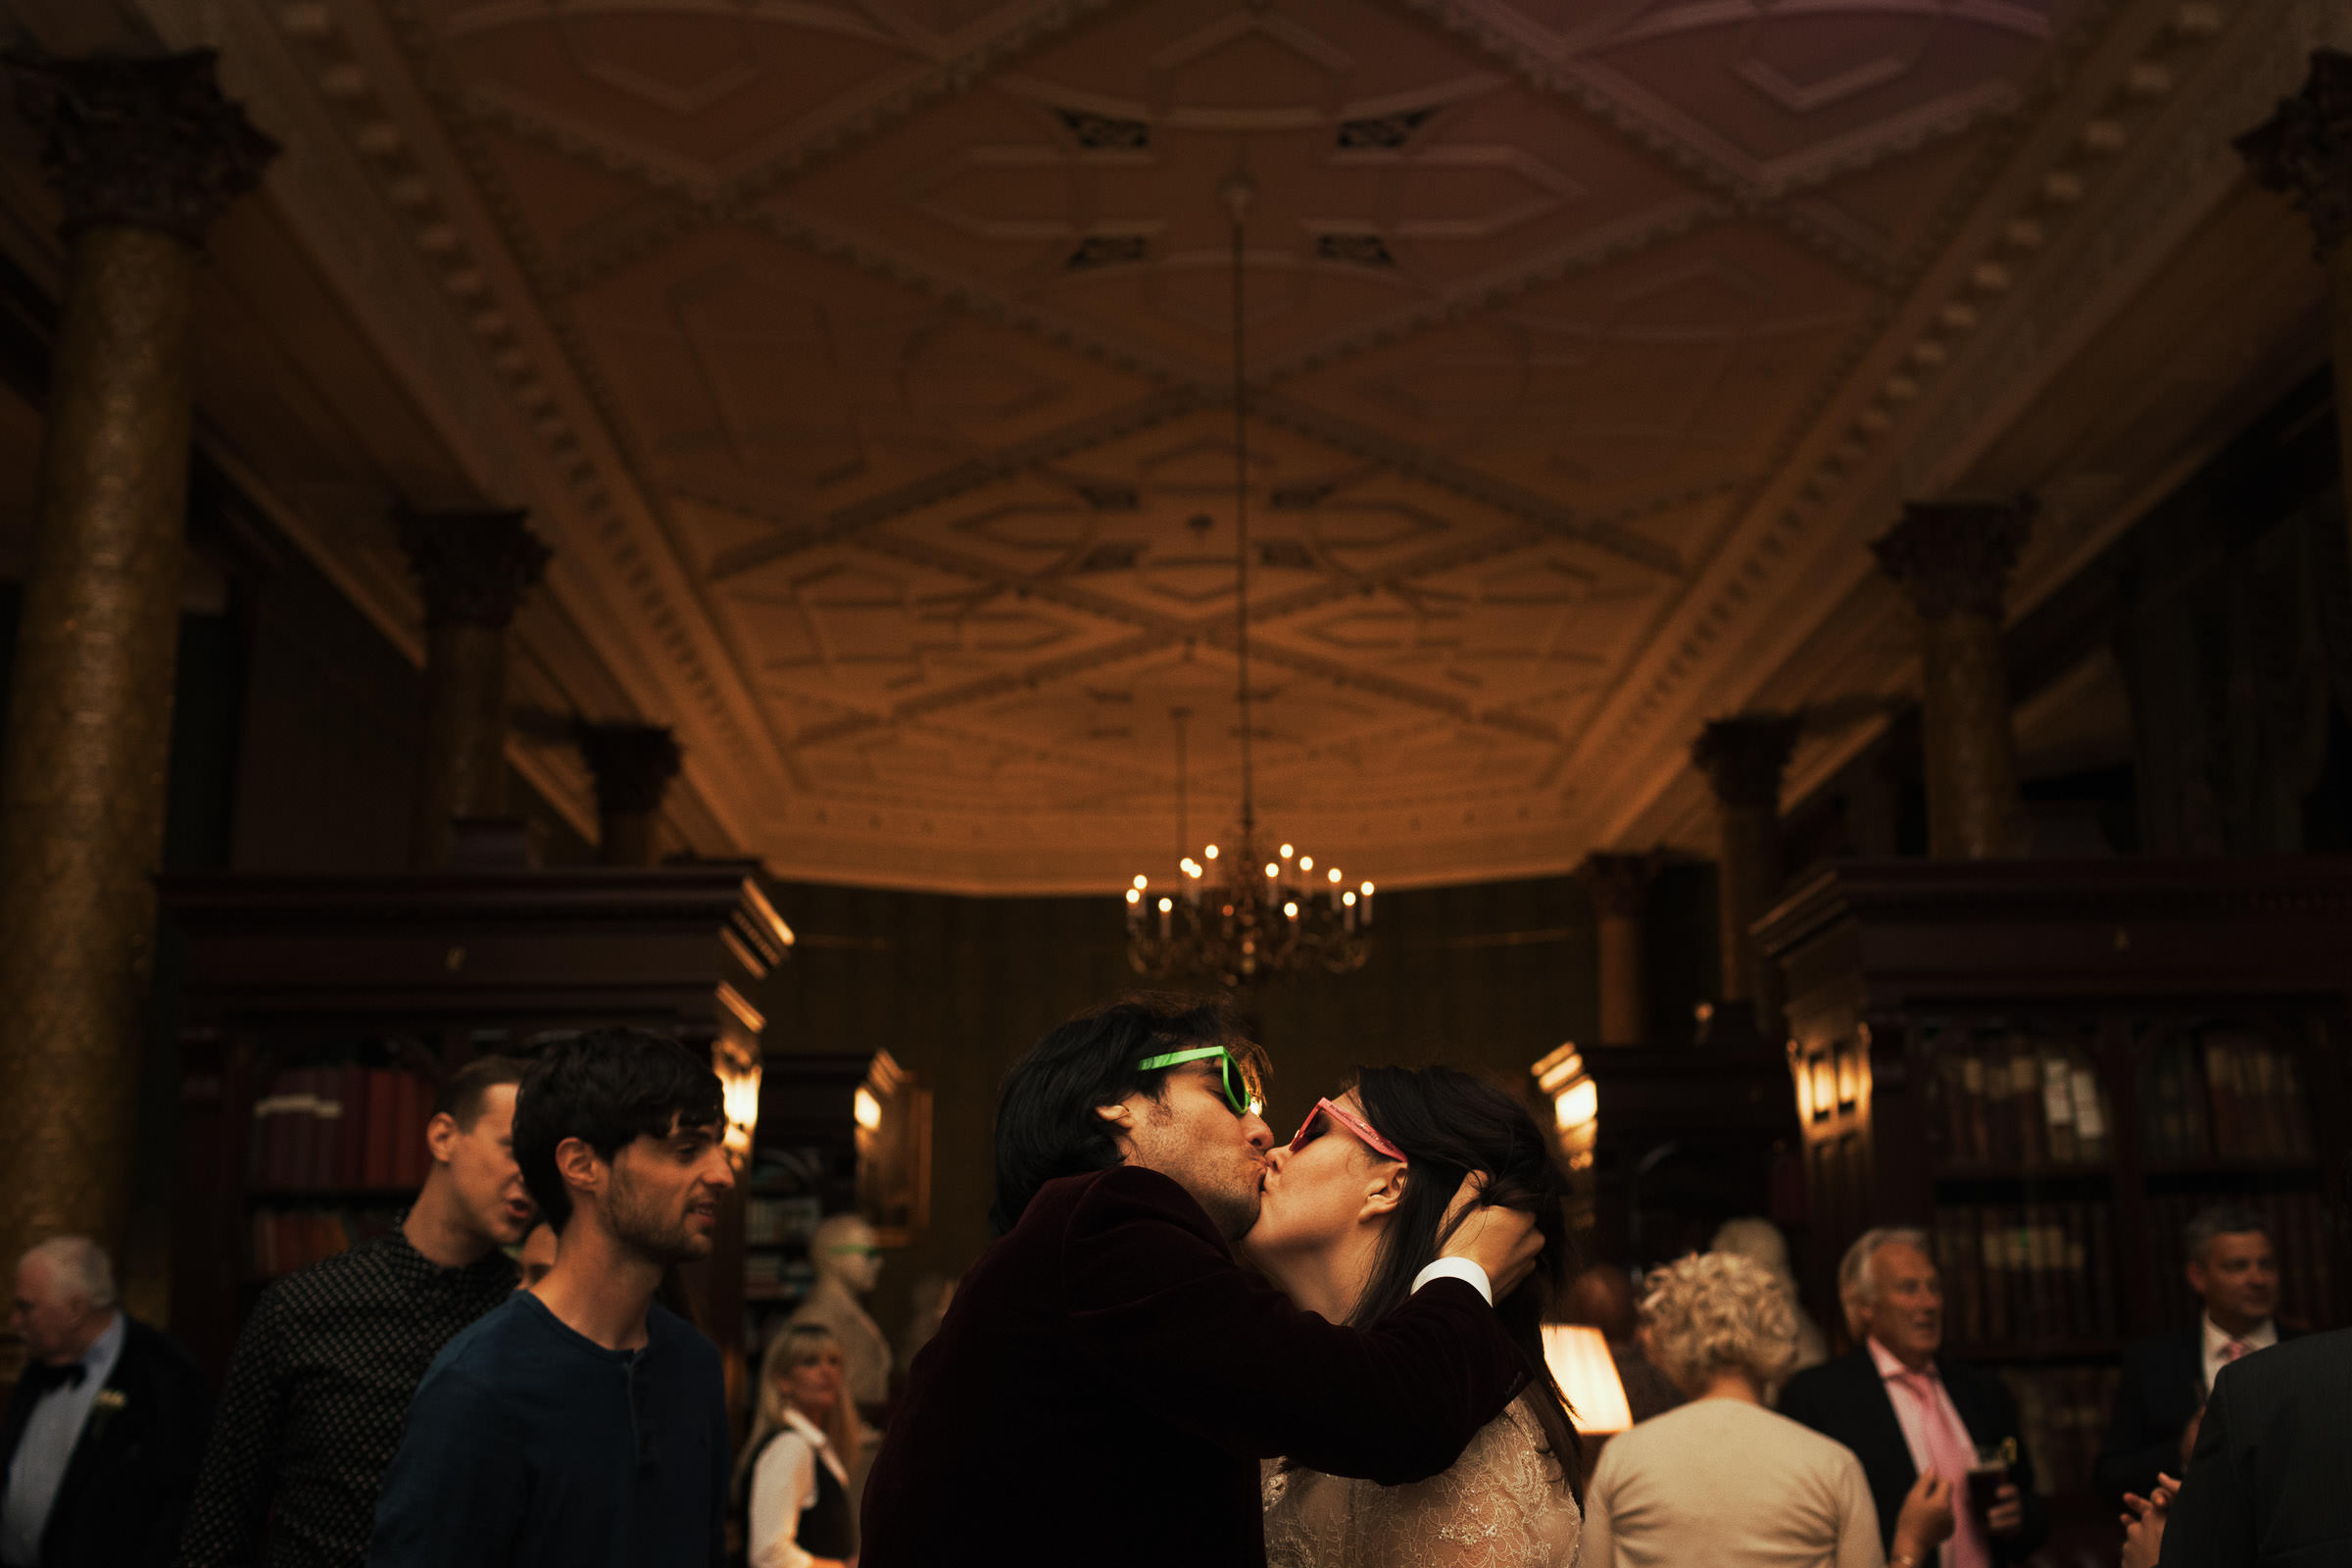 Newly married couple wearing bright sunglasses at wedding reception, kissing on the dance floor of the smoking room of the National Liberal Club.